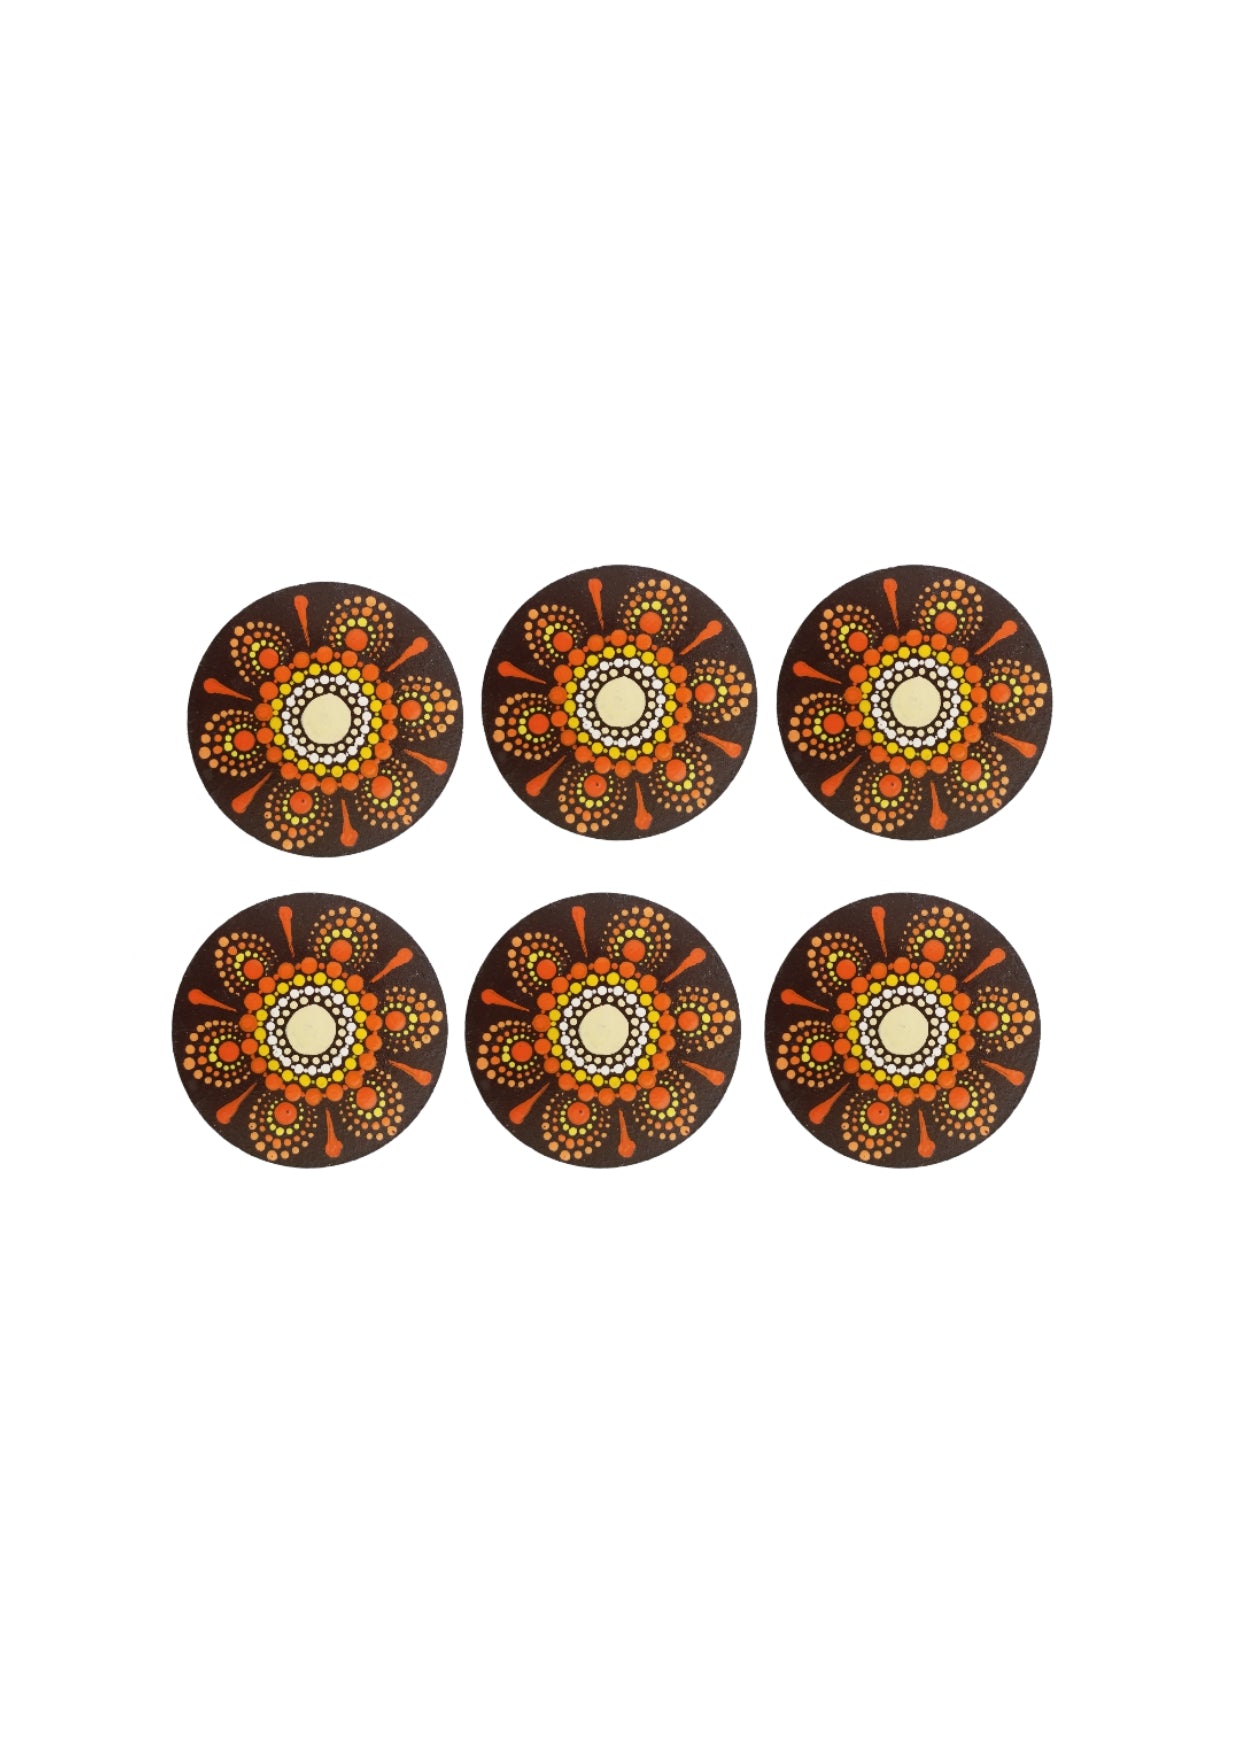 Artistter Coaster Set of 6 Beautiful Wooden Hand painted Mandala Coasters with Proper Coaster Stand Designer Coaster Set fit for Tea Cups, Coffee Mugs and Glasses (6 pc Round 7.5 x 7.5 inch)